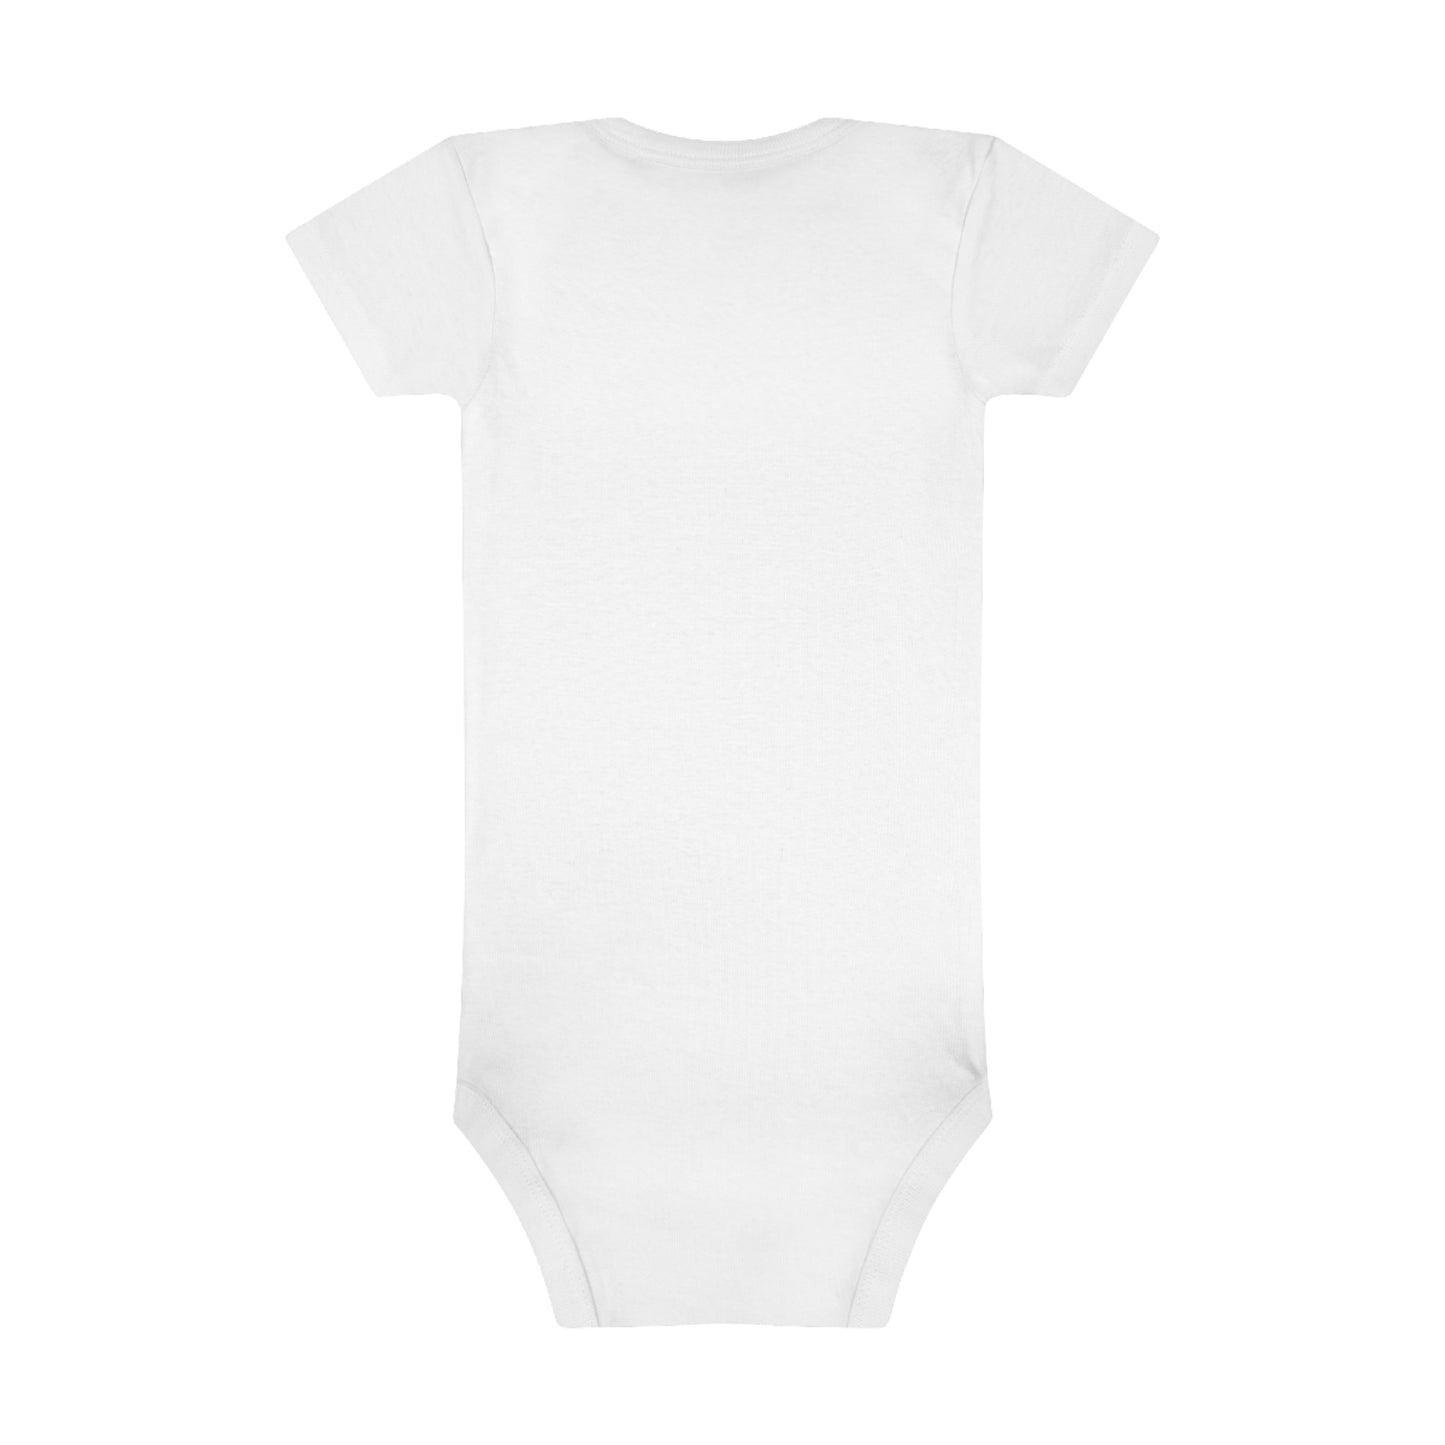 Snuggle This Muggle Baby Onesie® - Harry Potter